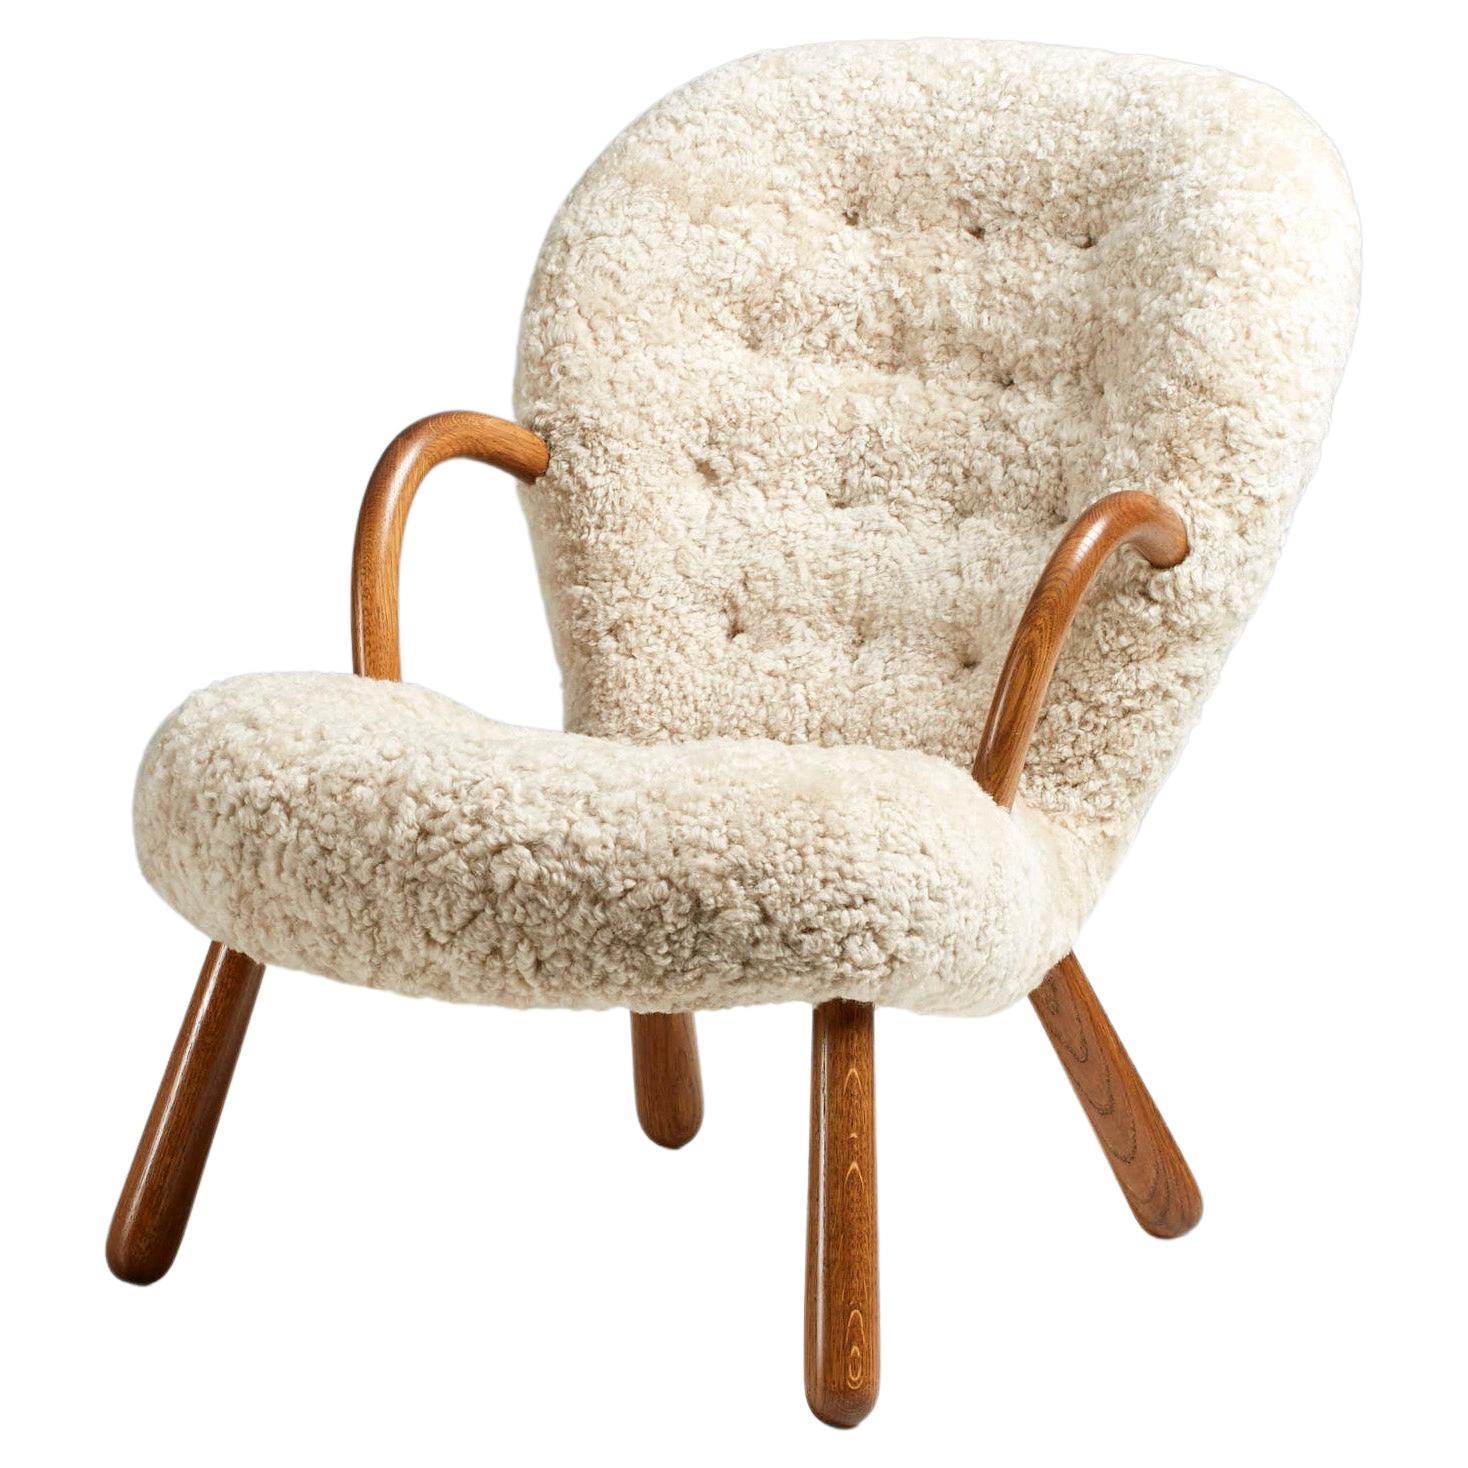 Re-Edition Sheepskin Clam Chairs by Arnold Madsen